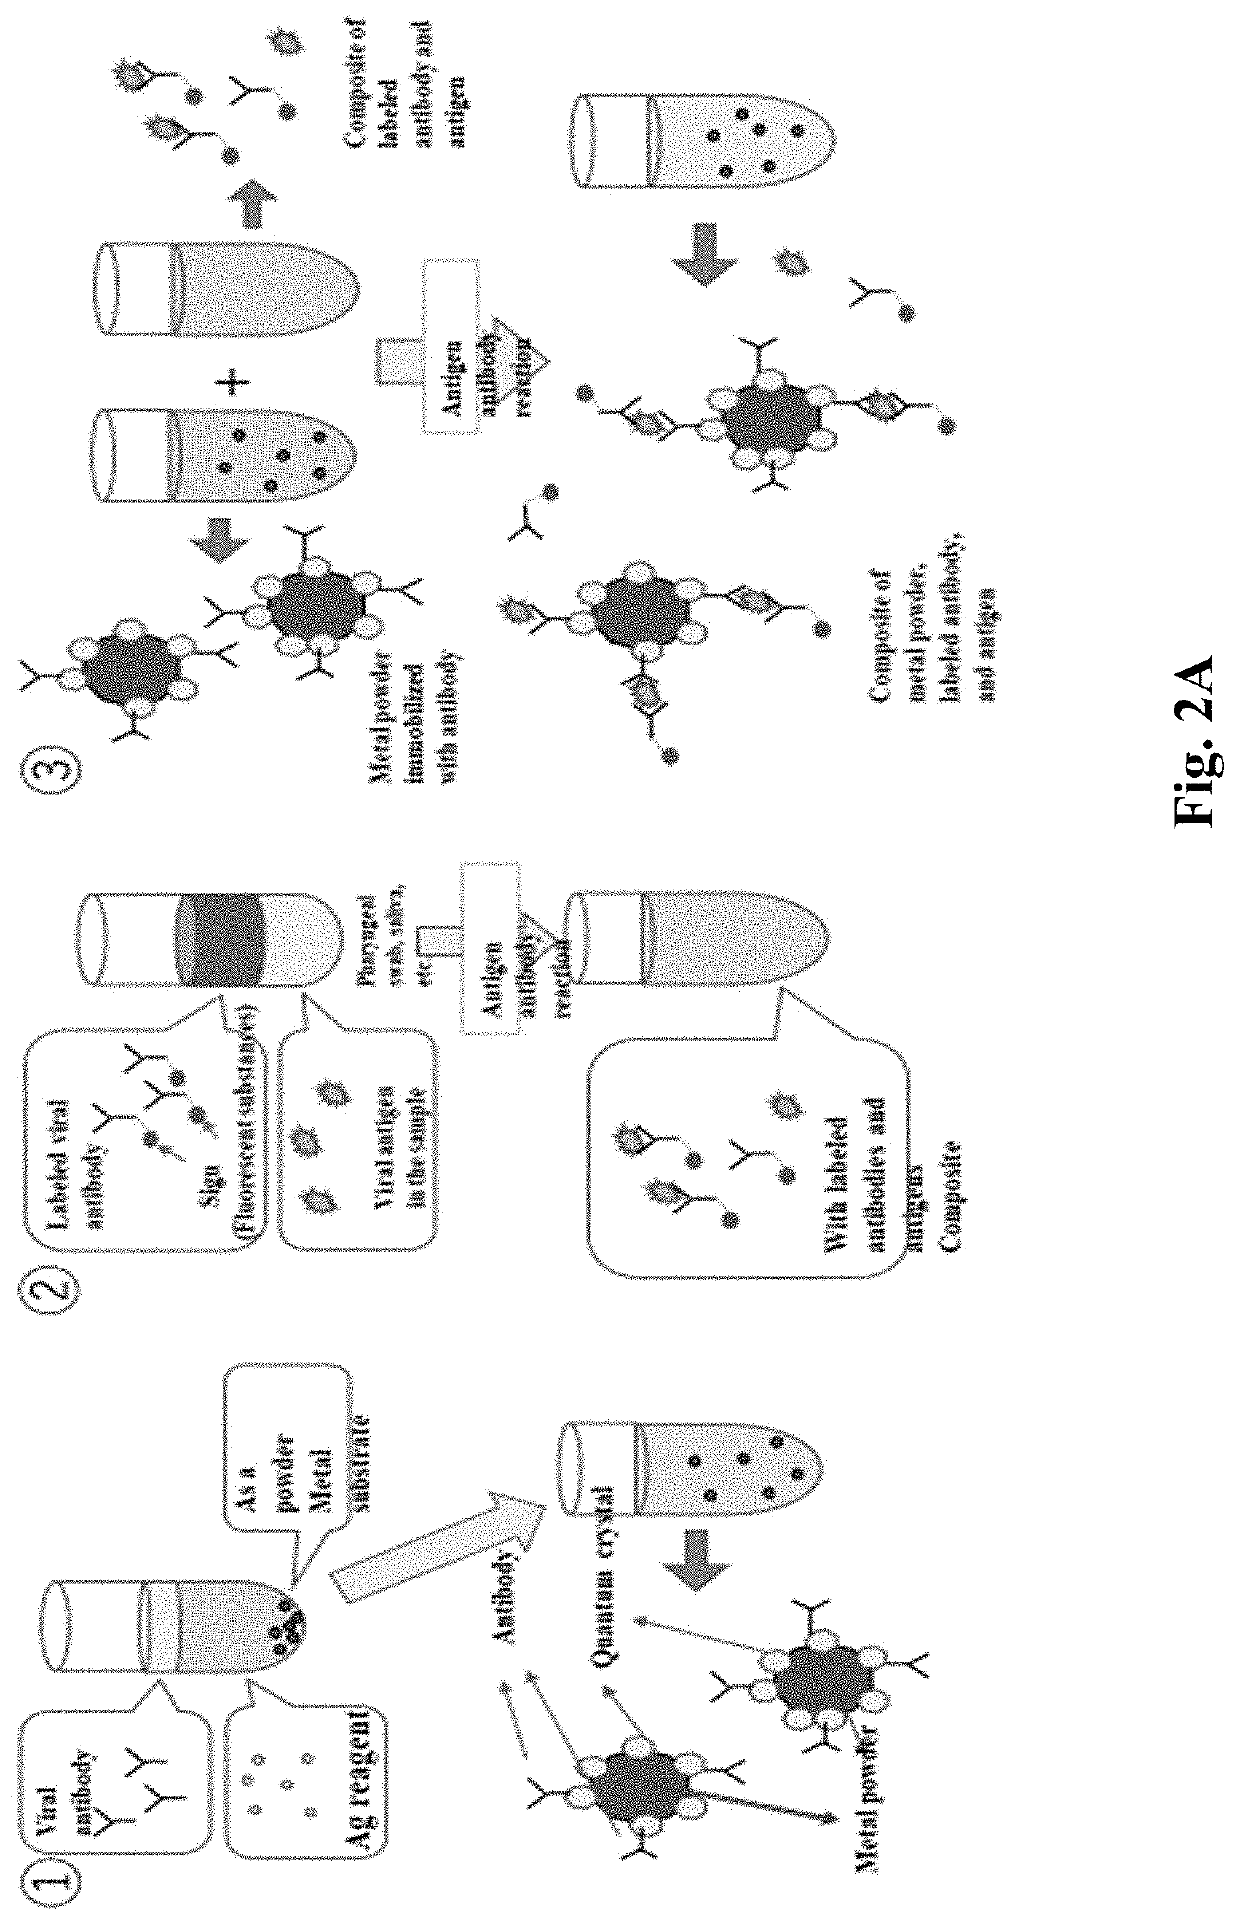 Fluorescence counting system for quantifying viruses or antibodies on an immobilized metal substrate by using an antigen-antibody reaction